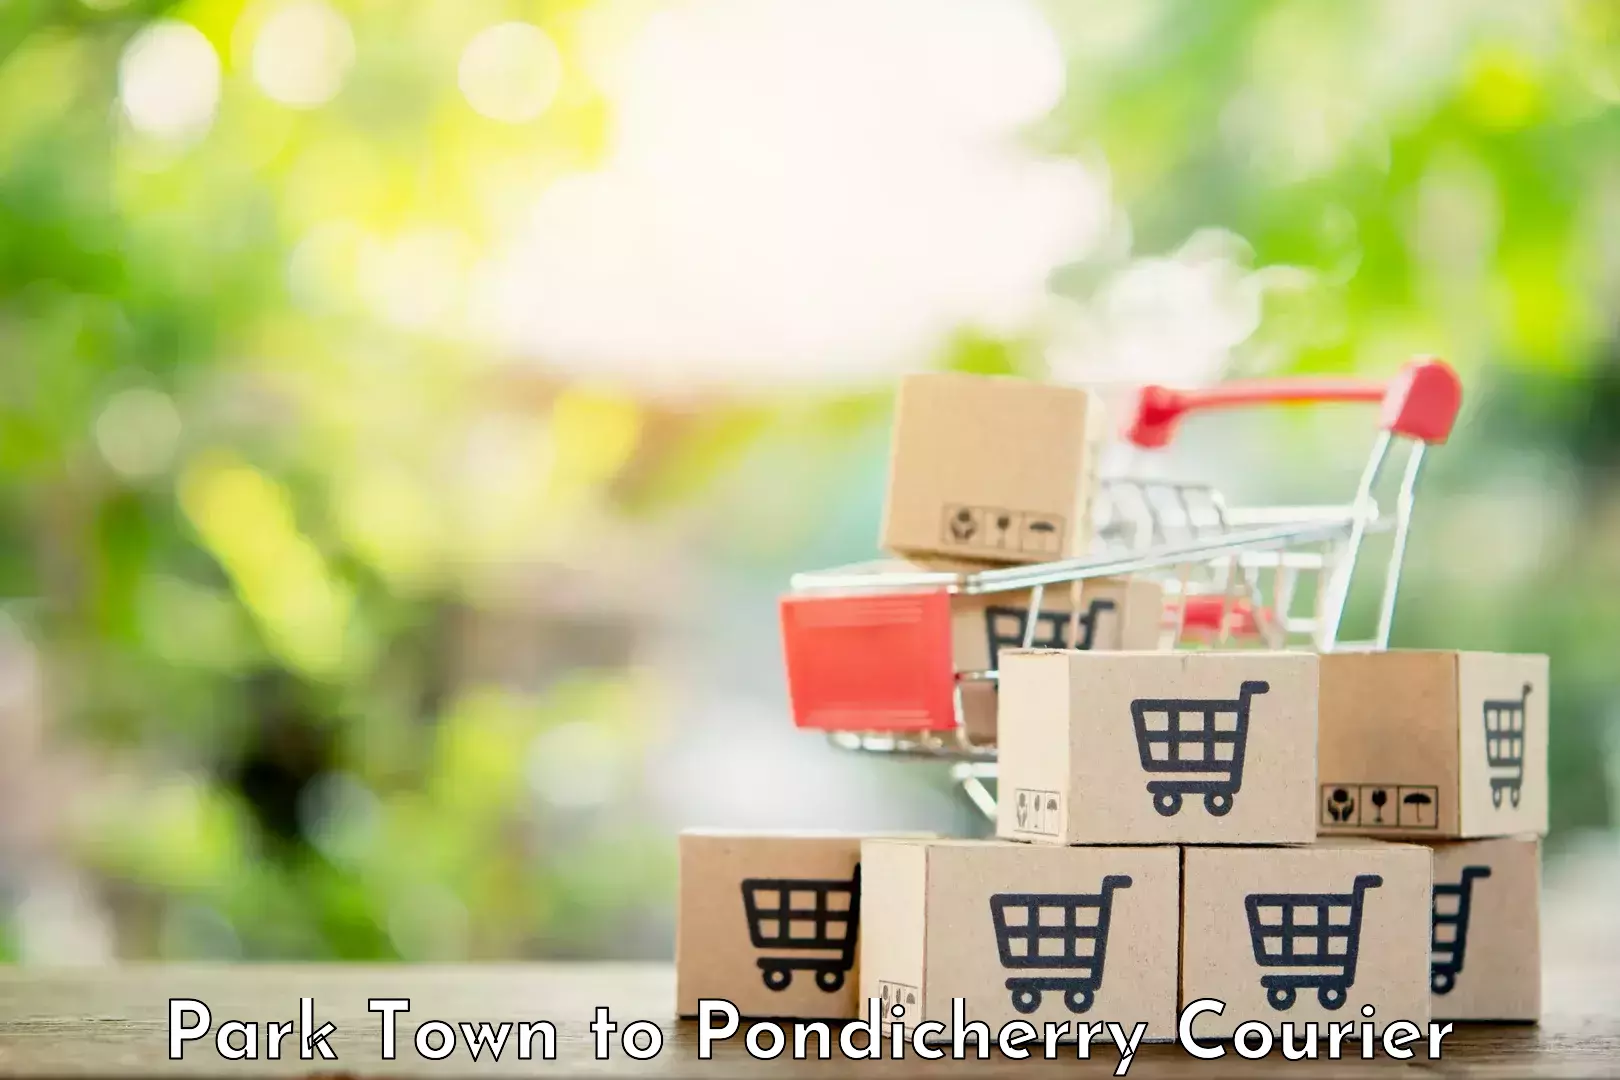 Subscription-based courier Park Town to Pondicherry